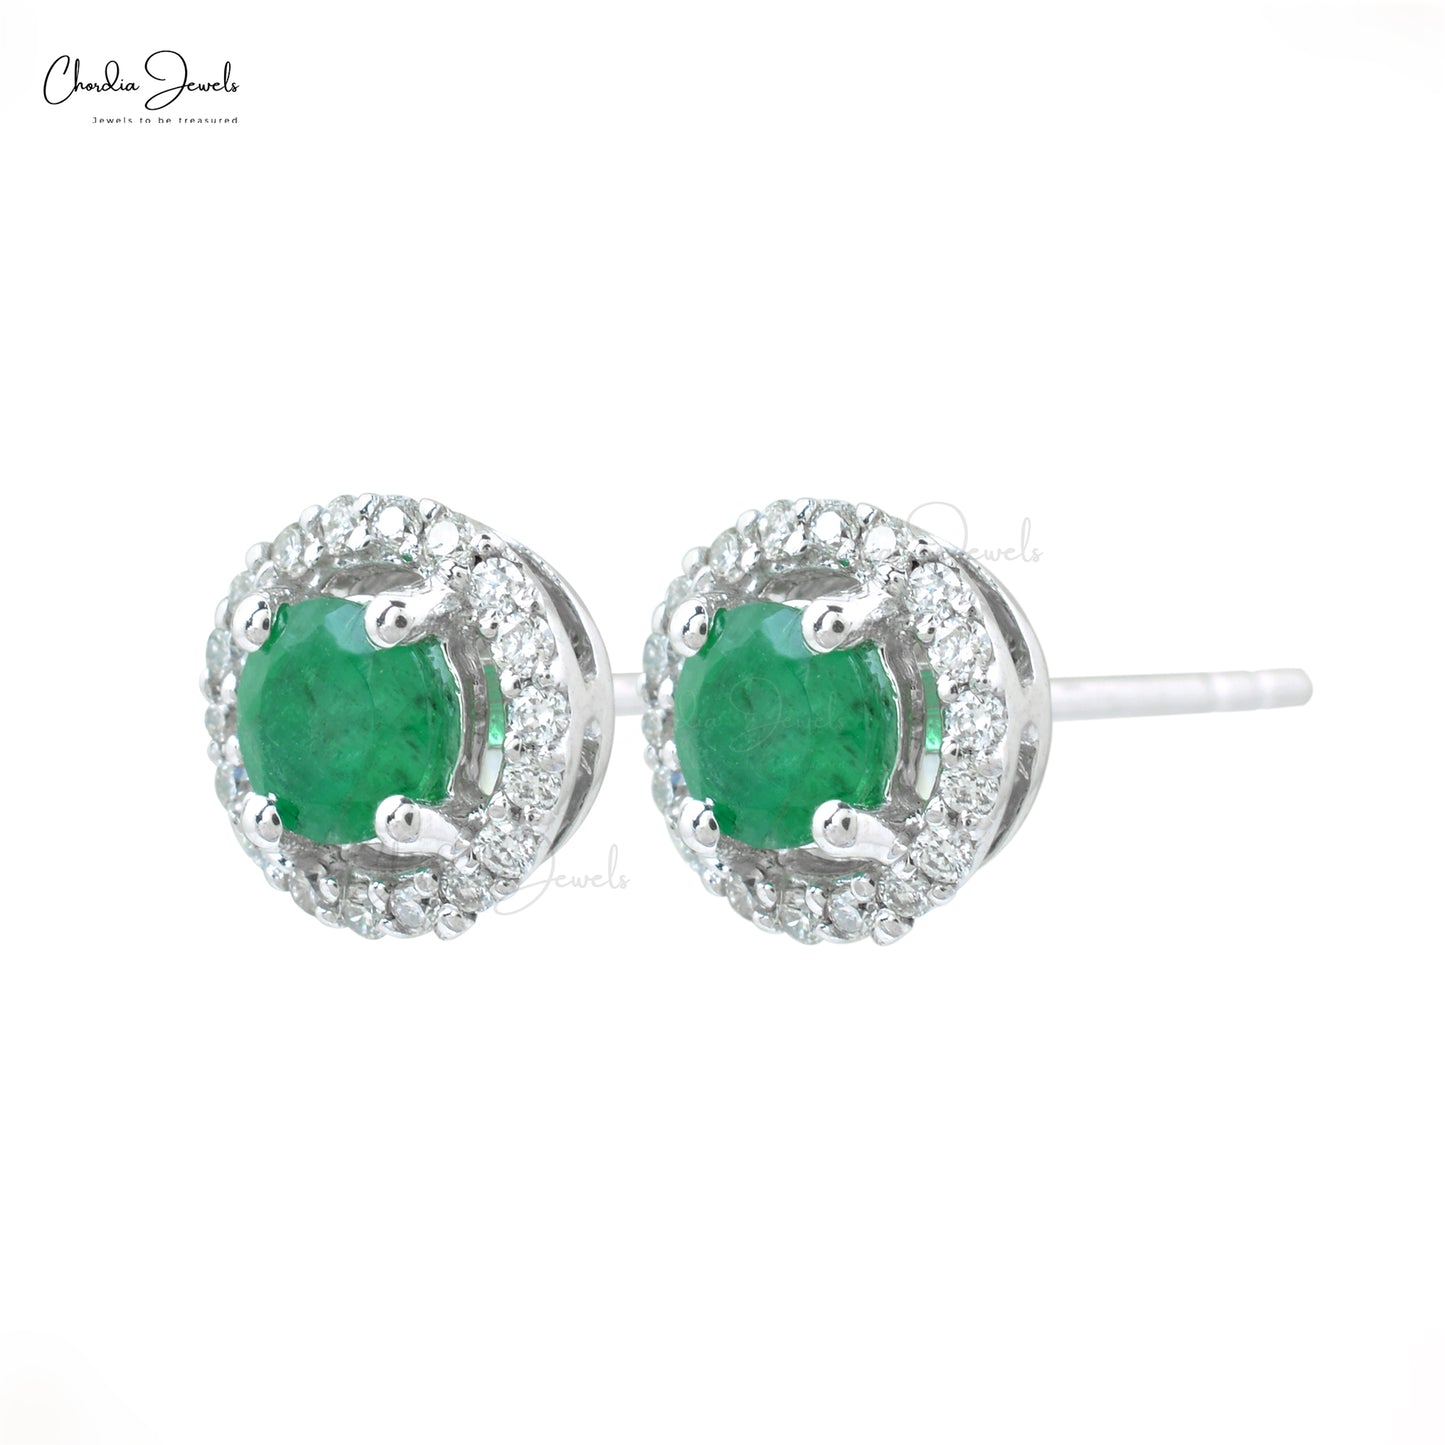 Load image into Gallery viewer, Genuine Green Emerald Dainty Earrings 4mm Round Cut Gemstone Halo Stud Earrings 14k Real White Gold Diamond Minimalist Jewelry For Easter Day
